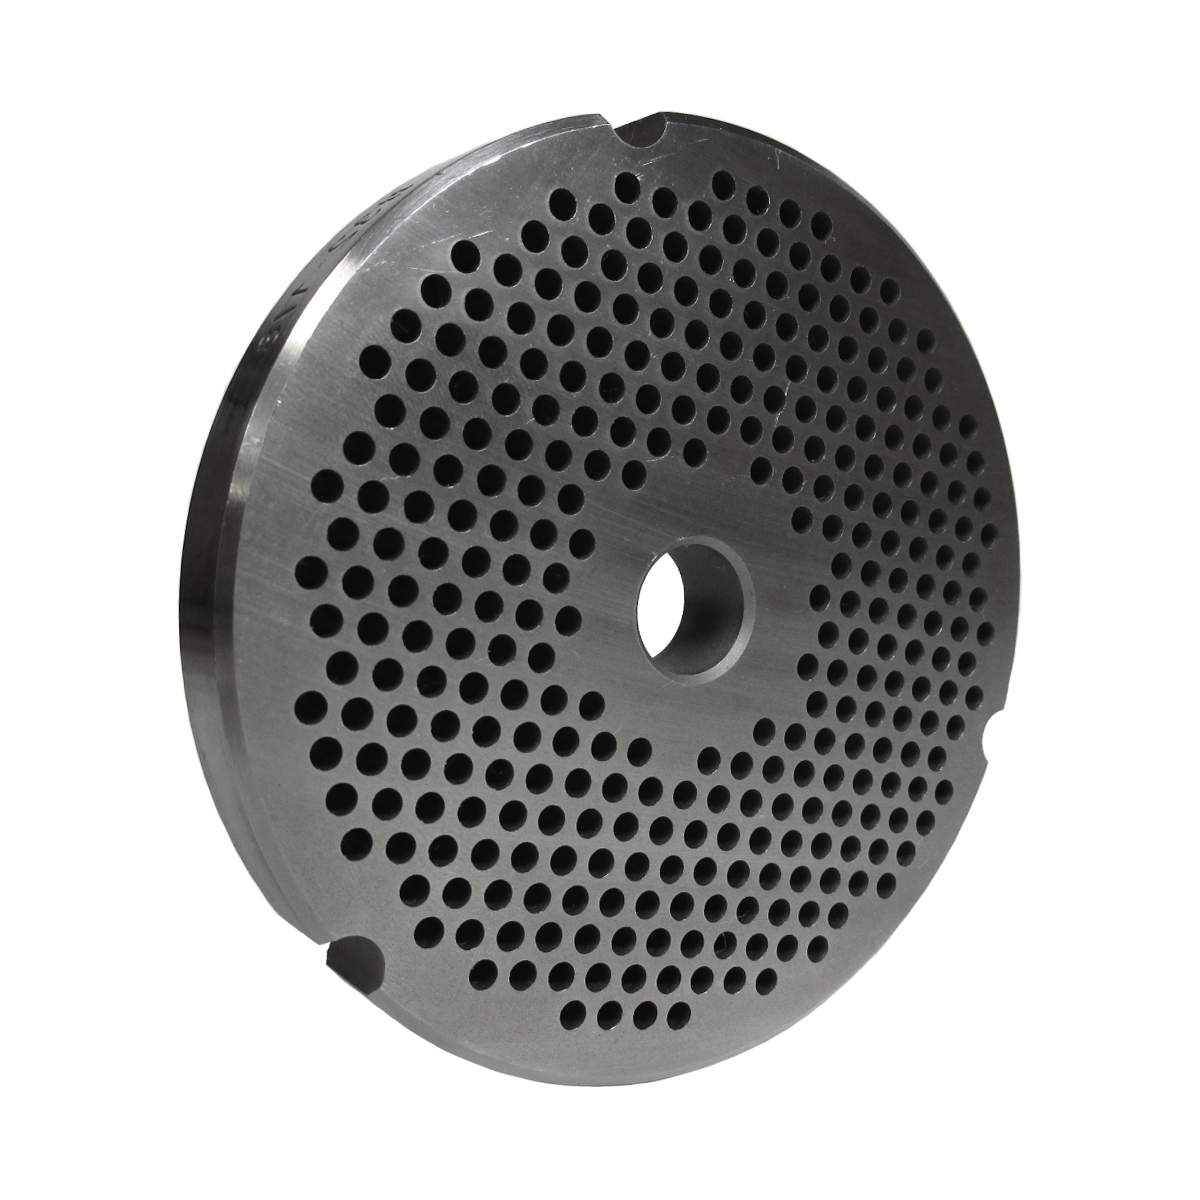 Grinder plate for #32 grinders with 1/8" hole, reversible